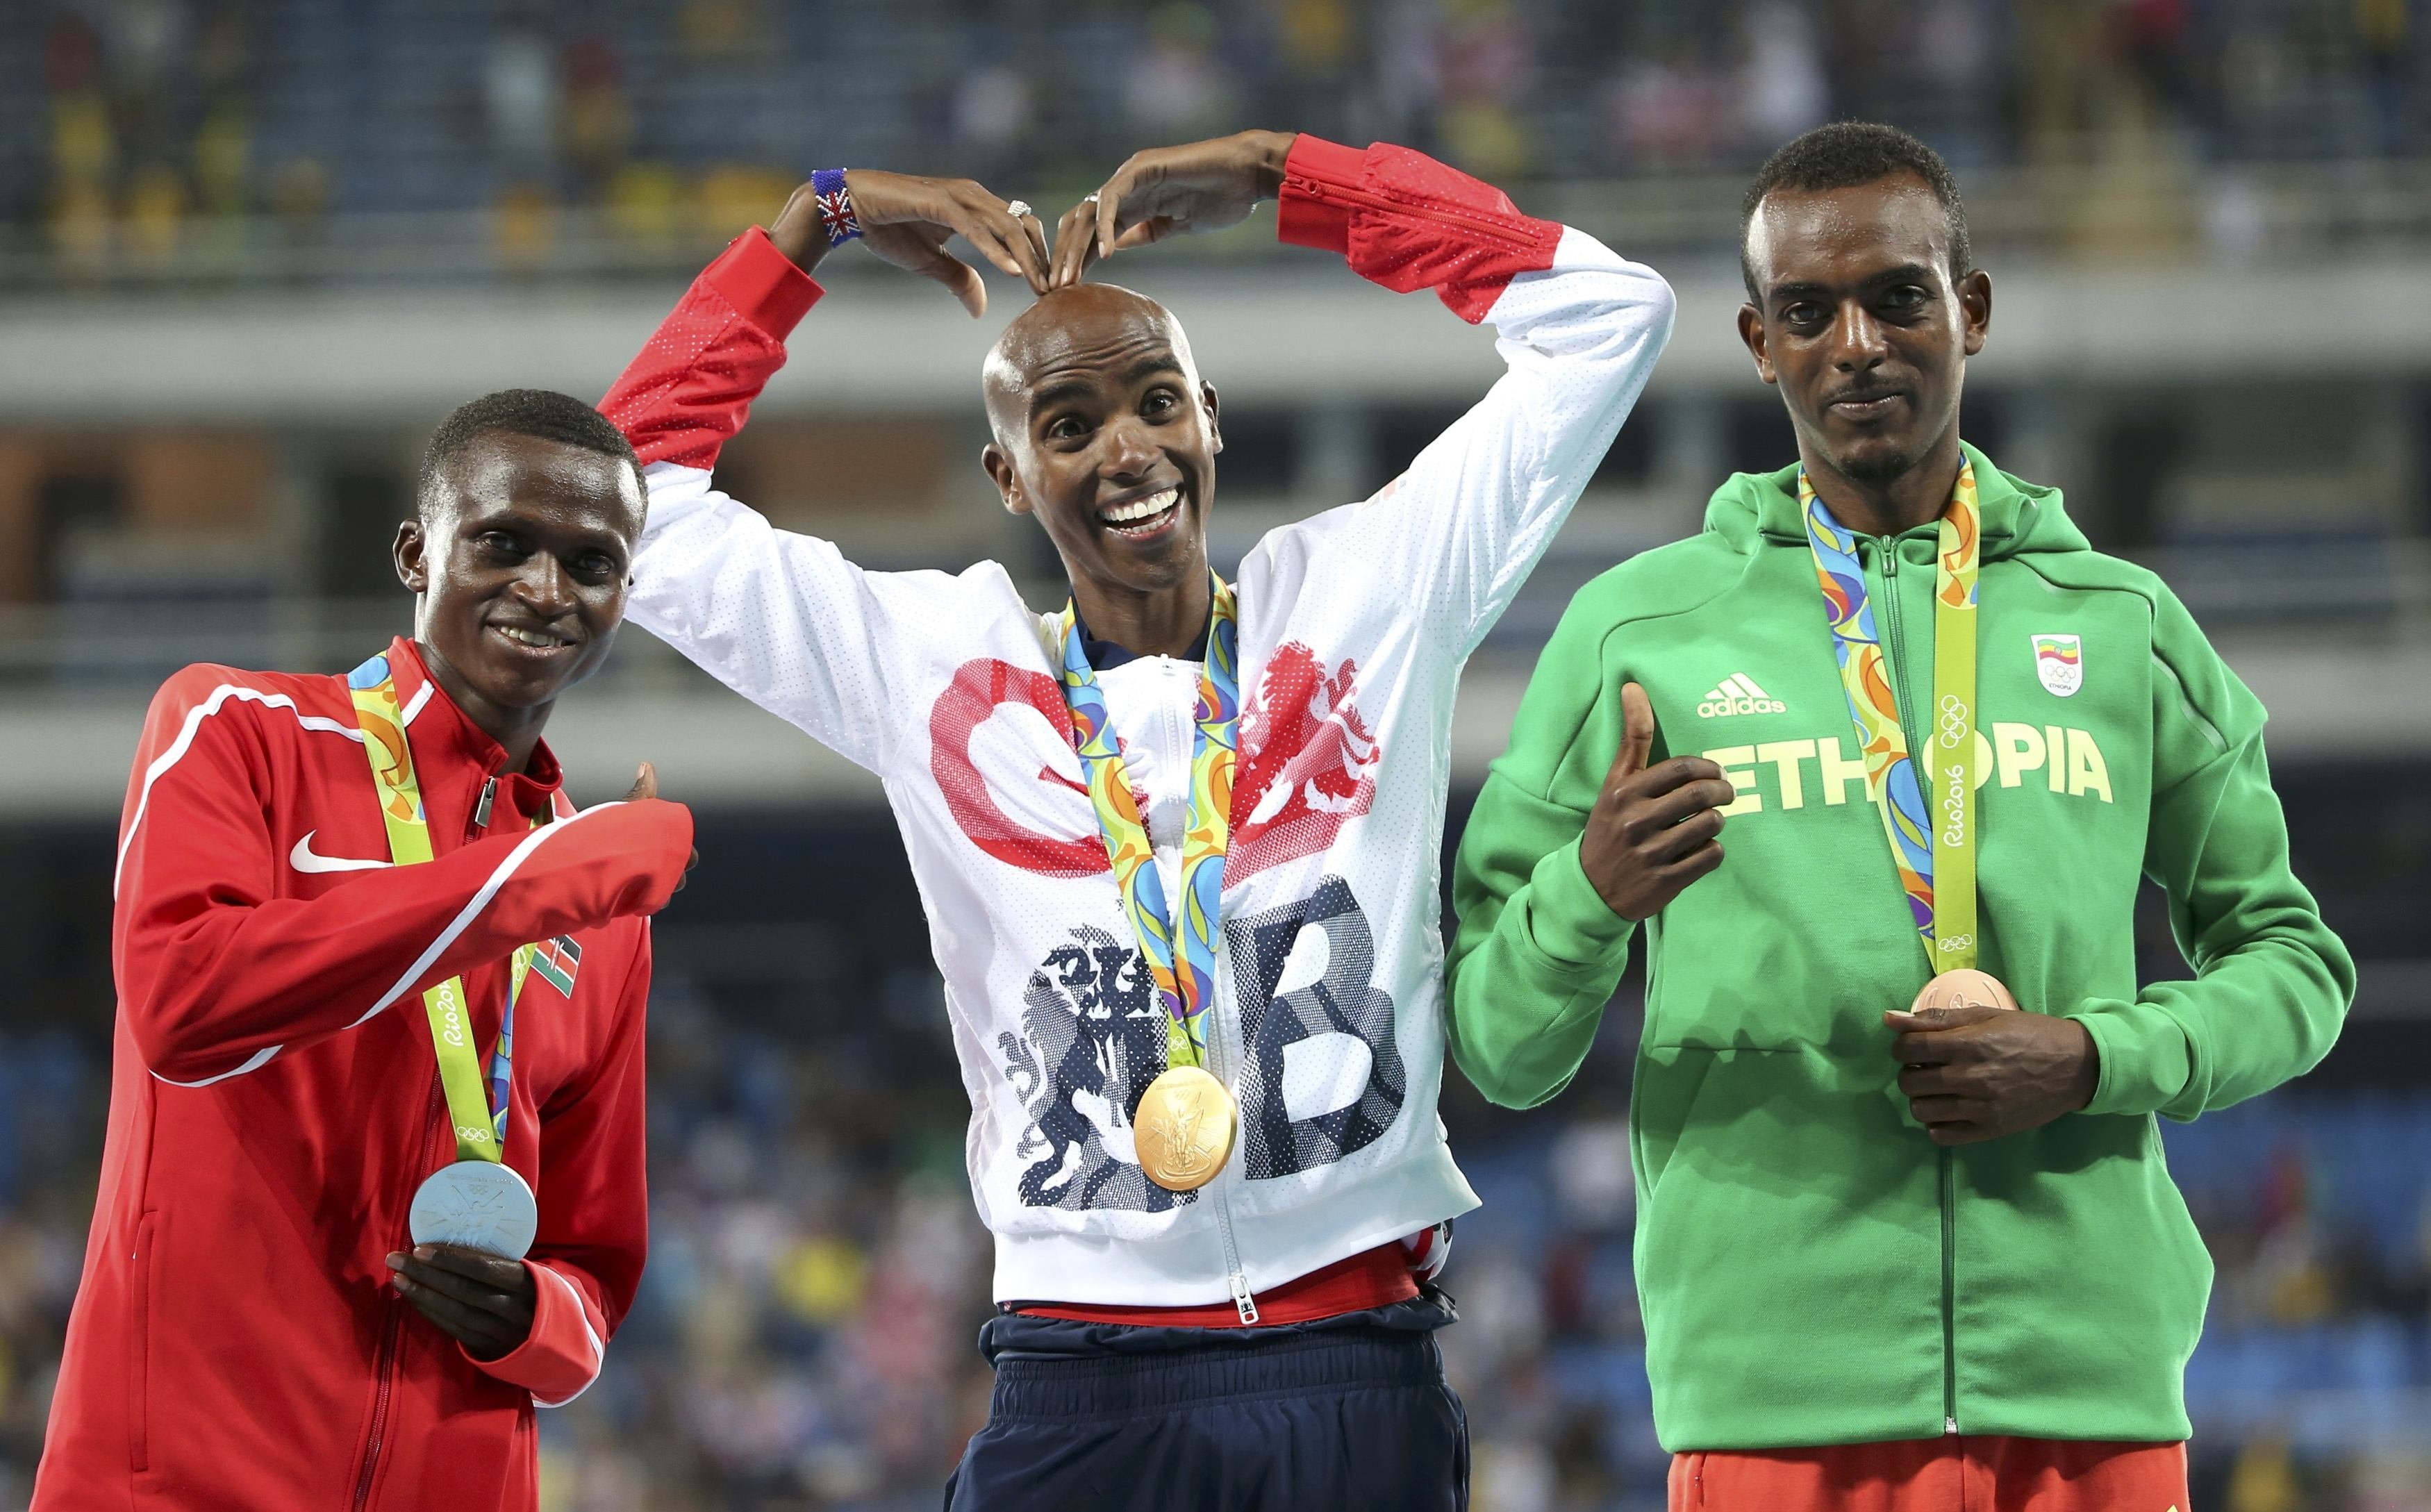 Sir Mo Farah: From tough beginnings to one of the UK's most successful  athletes